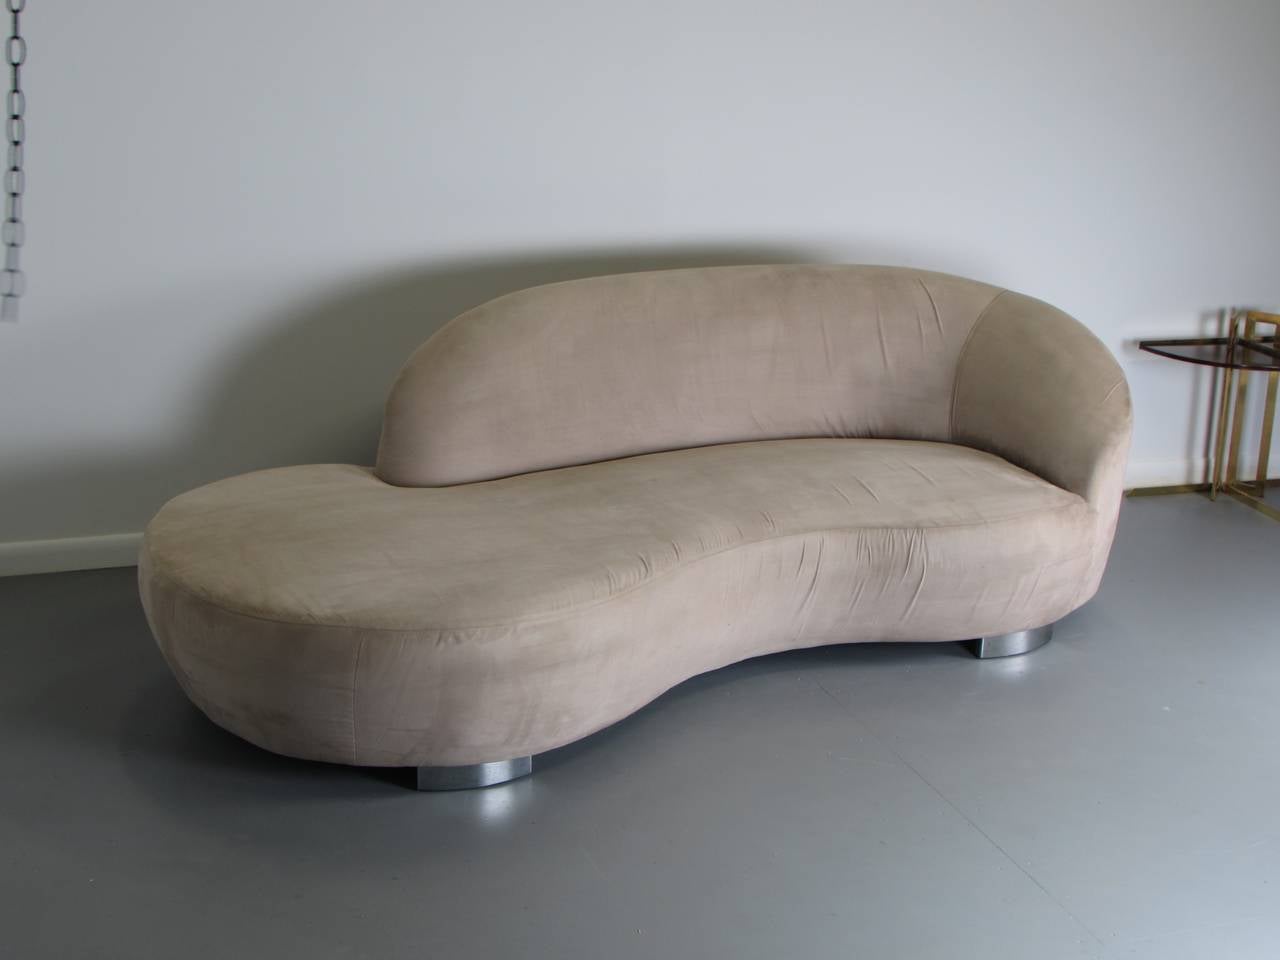 Fantastic serpentine cloud sofa by Vladimir Kagan for directional, 1970s. This piece is in original condition. Upholstery has significant wear. Structurally perfect and chrome bases are in great condition. Ready for your custom upholstery!